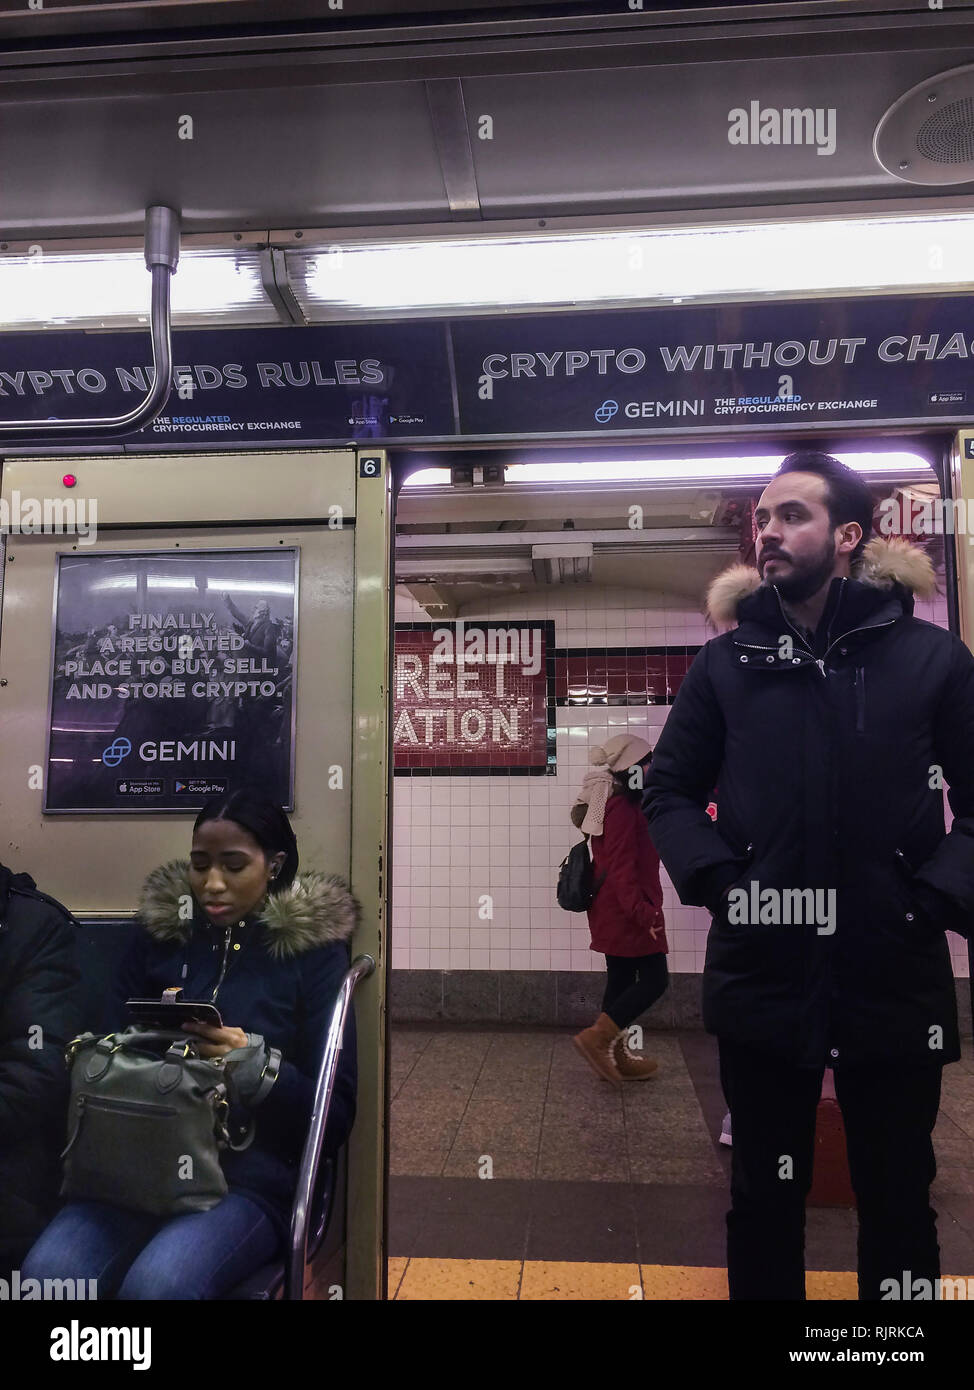 Advertising for the Winklevoss brothers' Gemini Cryptocurrency Exchange on the subway in New York on Tuesday, January 22, 2019. Twins Cameron and Tyler Winklevoss founded the exchange in 2015 trading Bitcoin and other cryptocurrencies.  (Â© Frances M. Roberts) Stock Photo